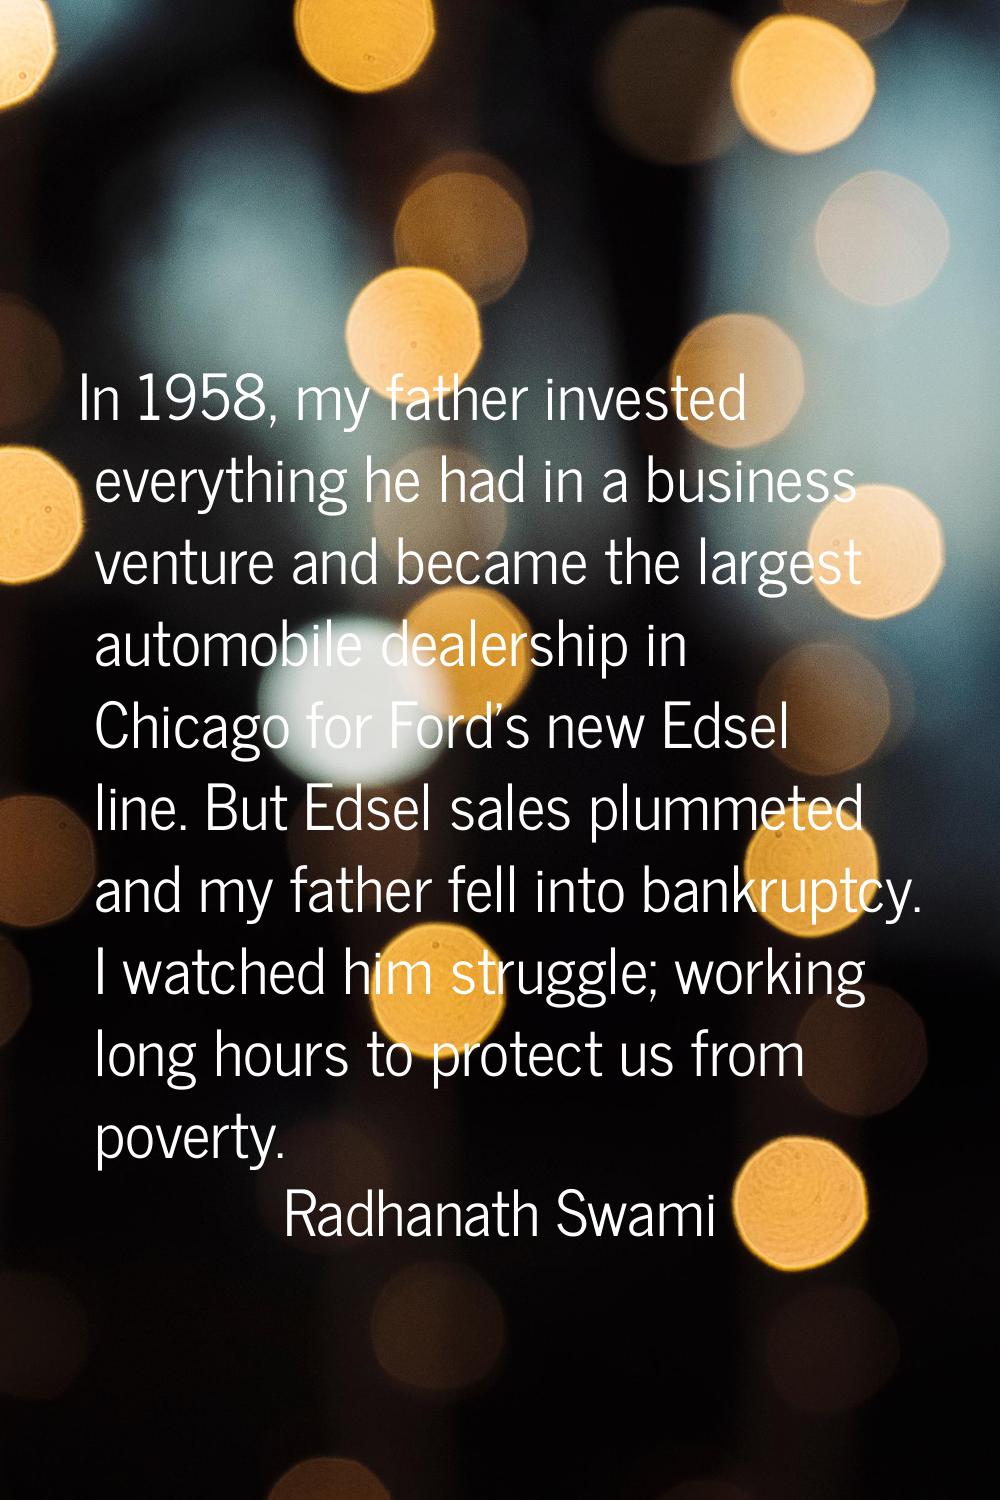 In 1958, my father invested everything he had in a business venture and became the largest automobi